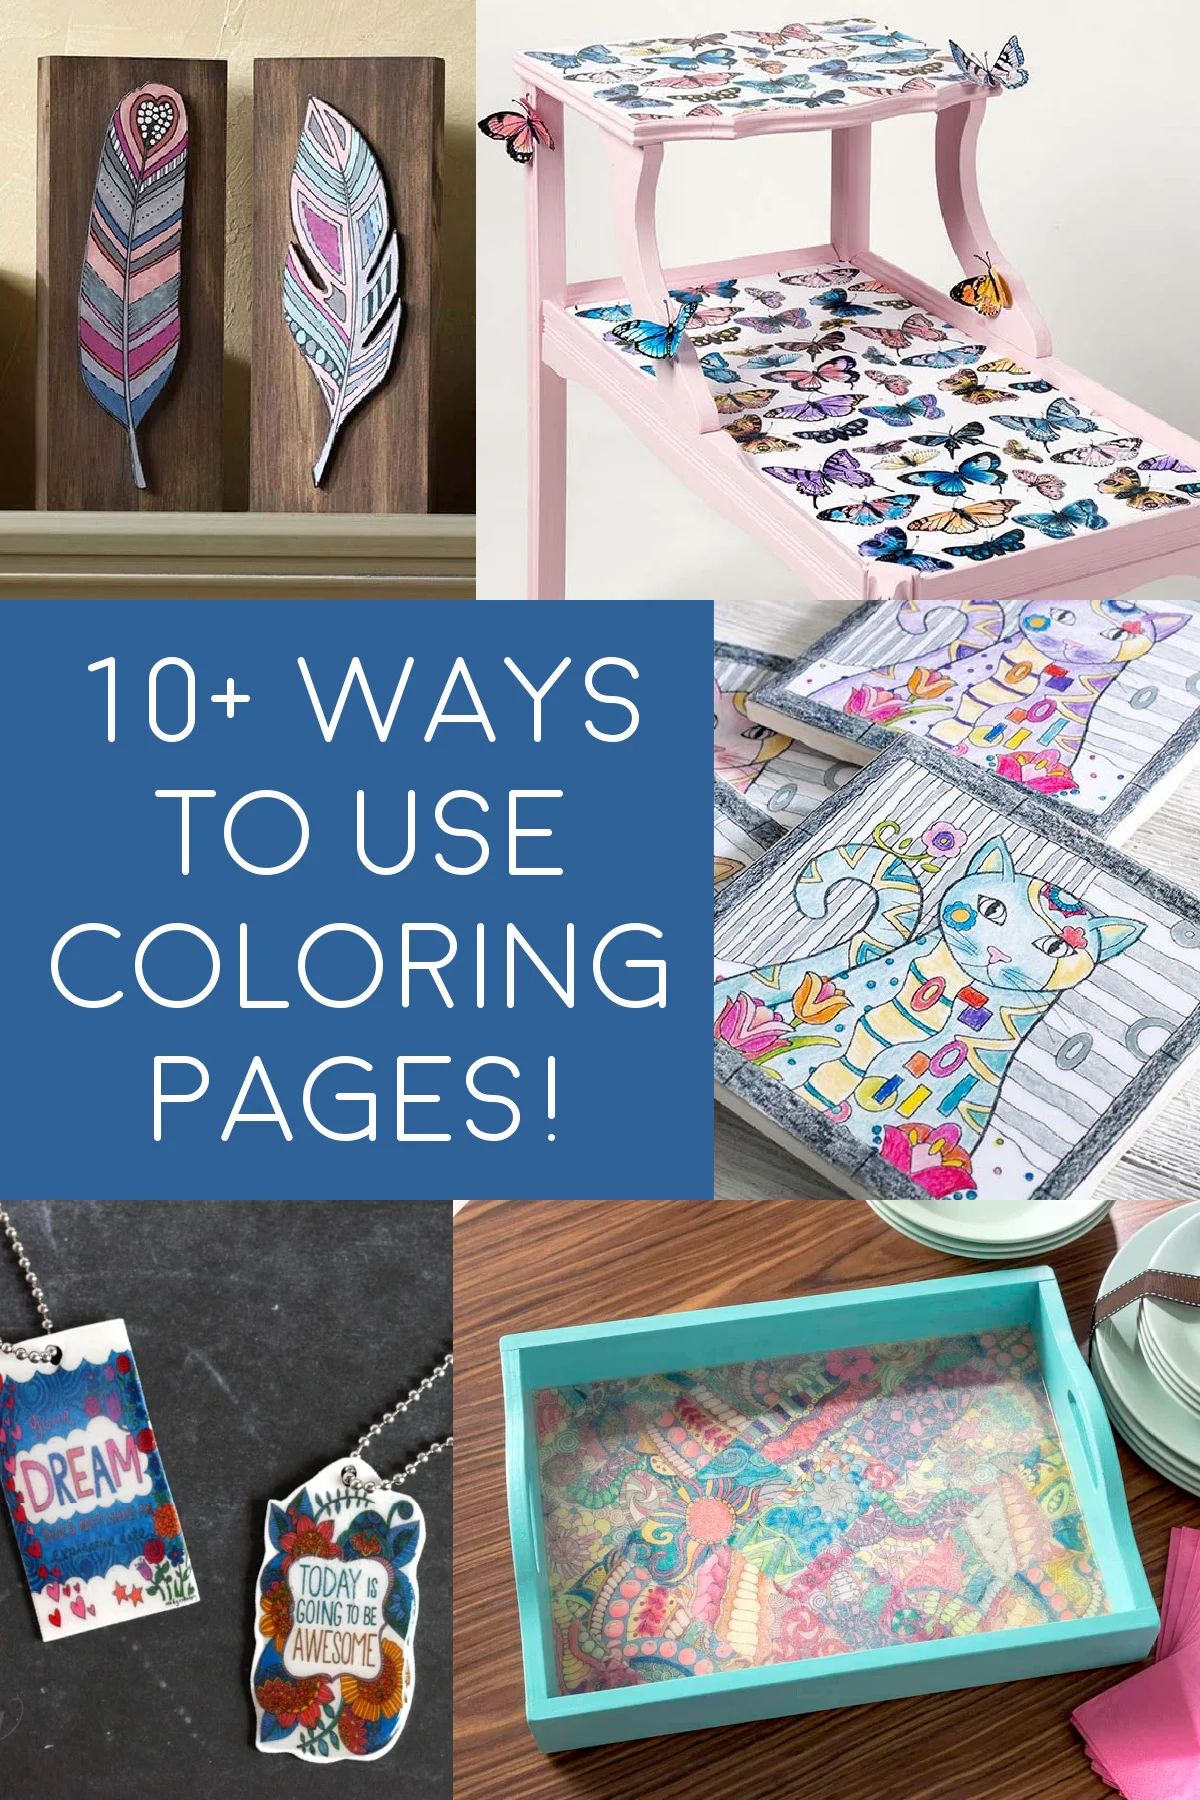 Ways to Use Coloring Pages